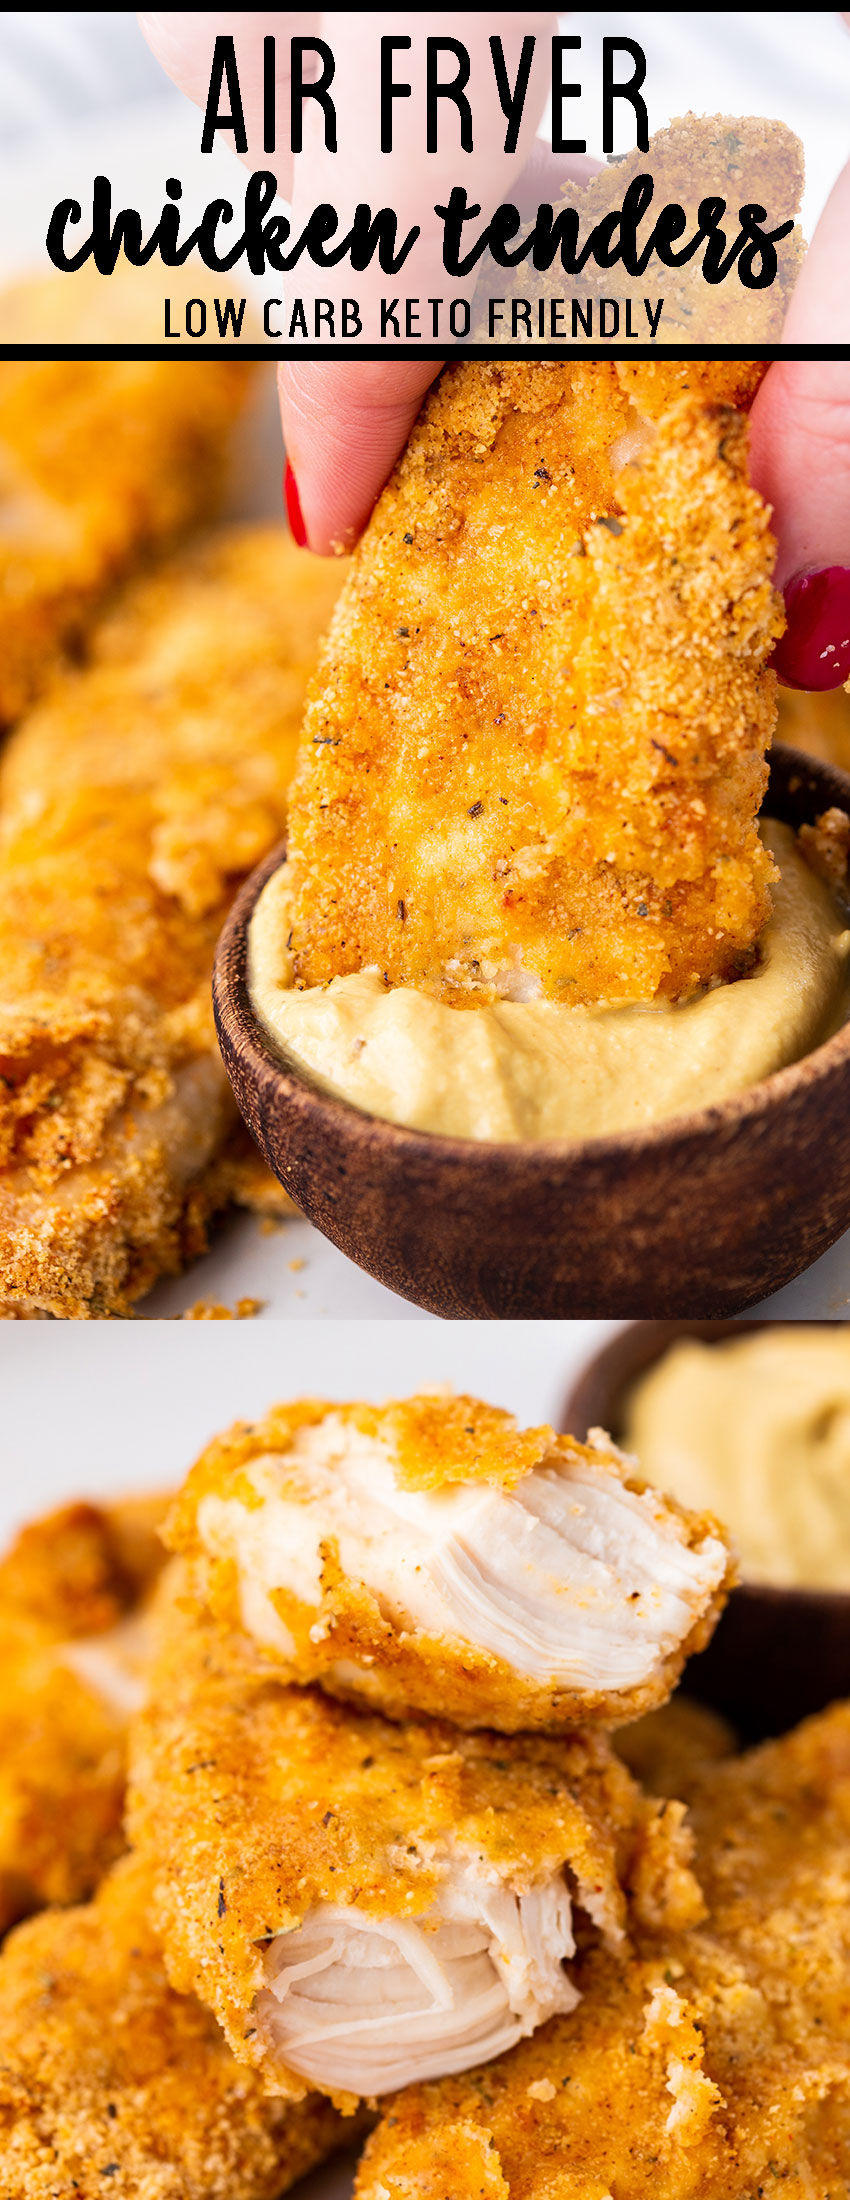 Air fryer chicken tenders are low carb and totally delicious